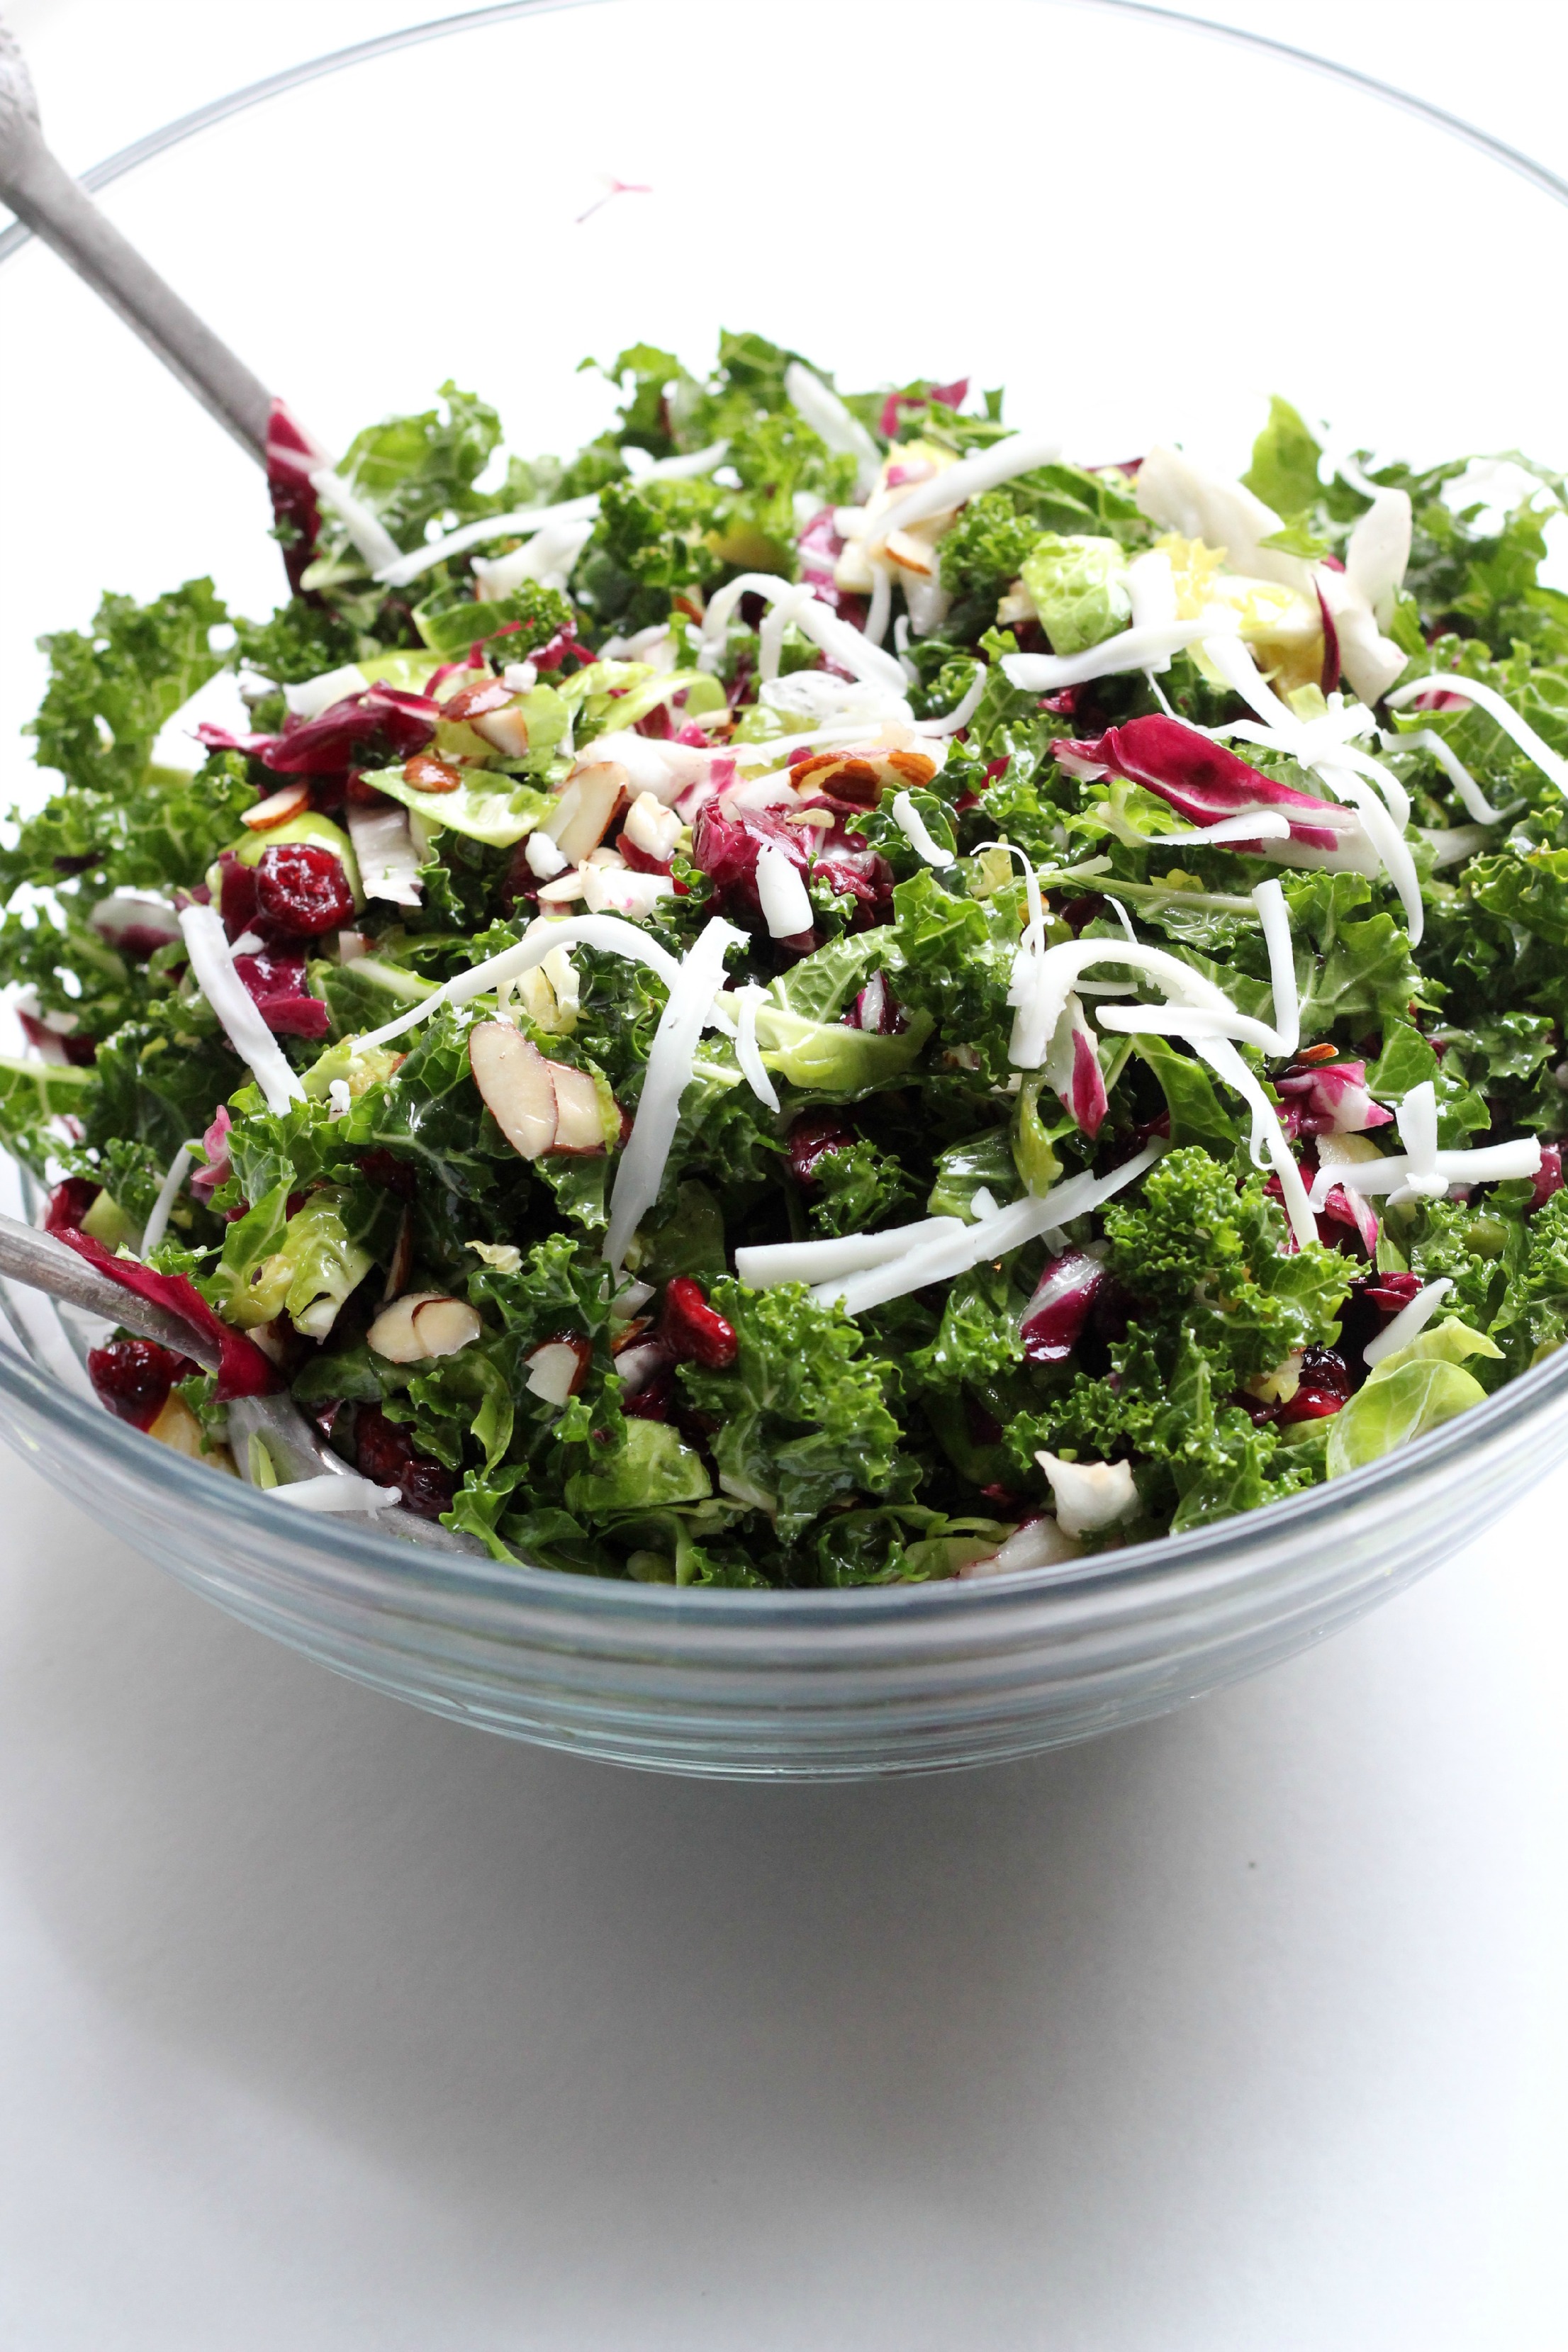 Paleo Super Green Salad with cranberries is AMAZING and perfect for food prep!